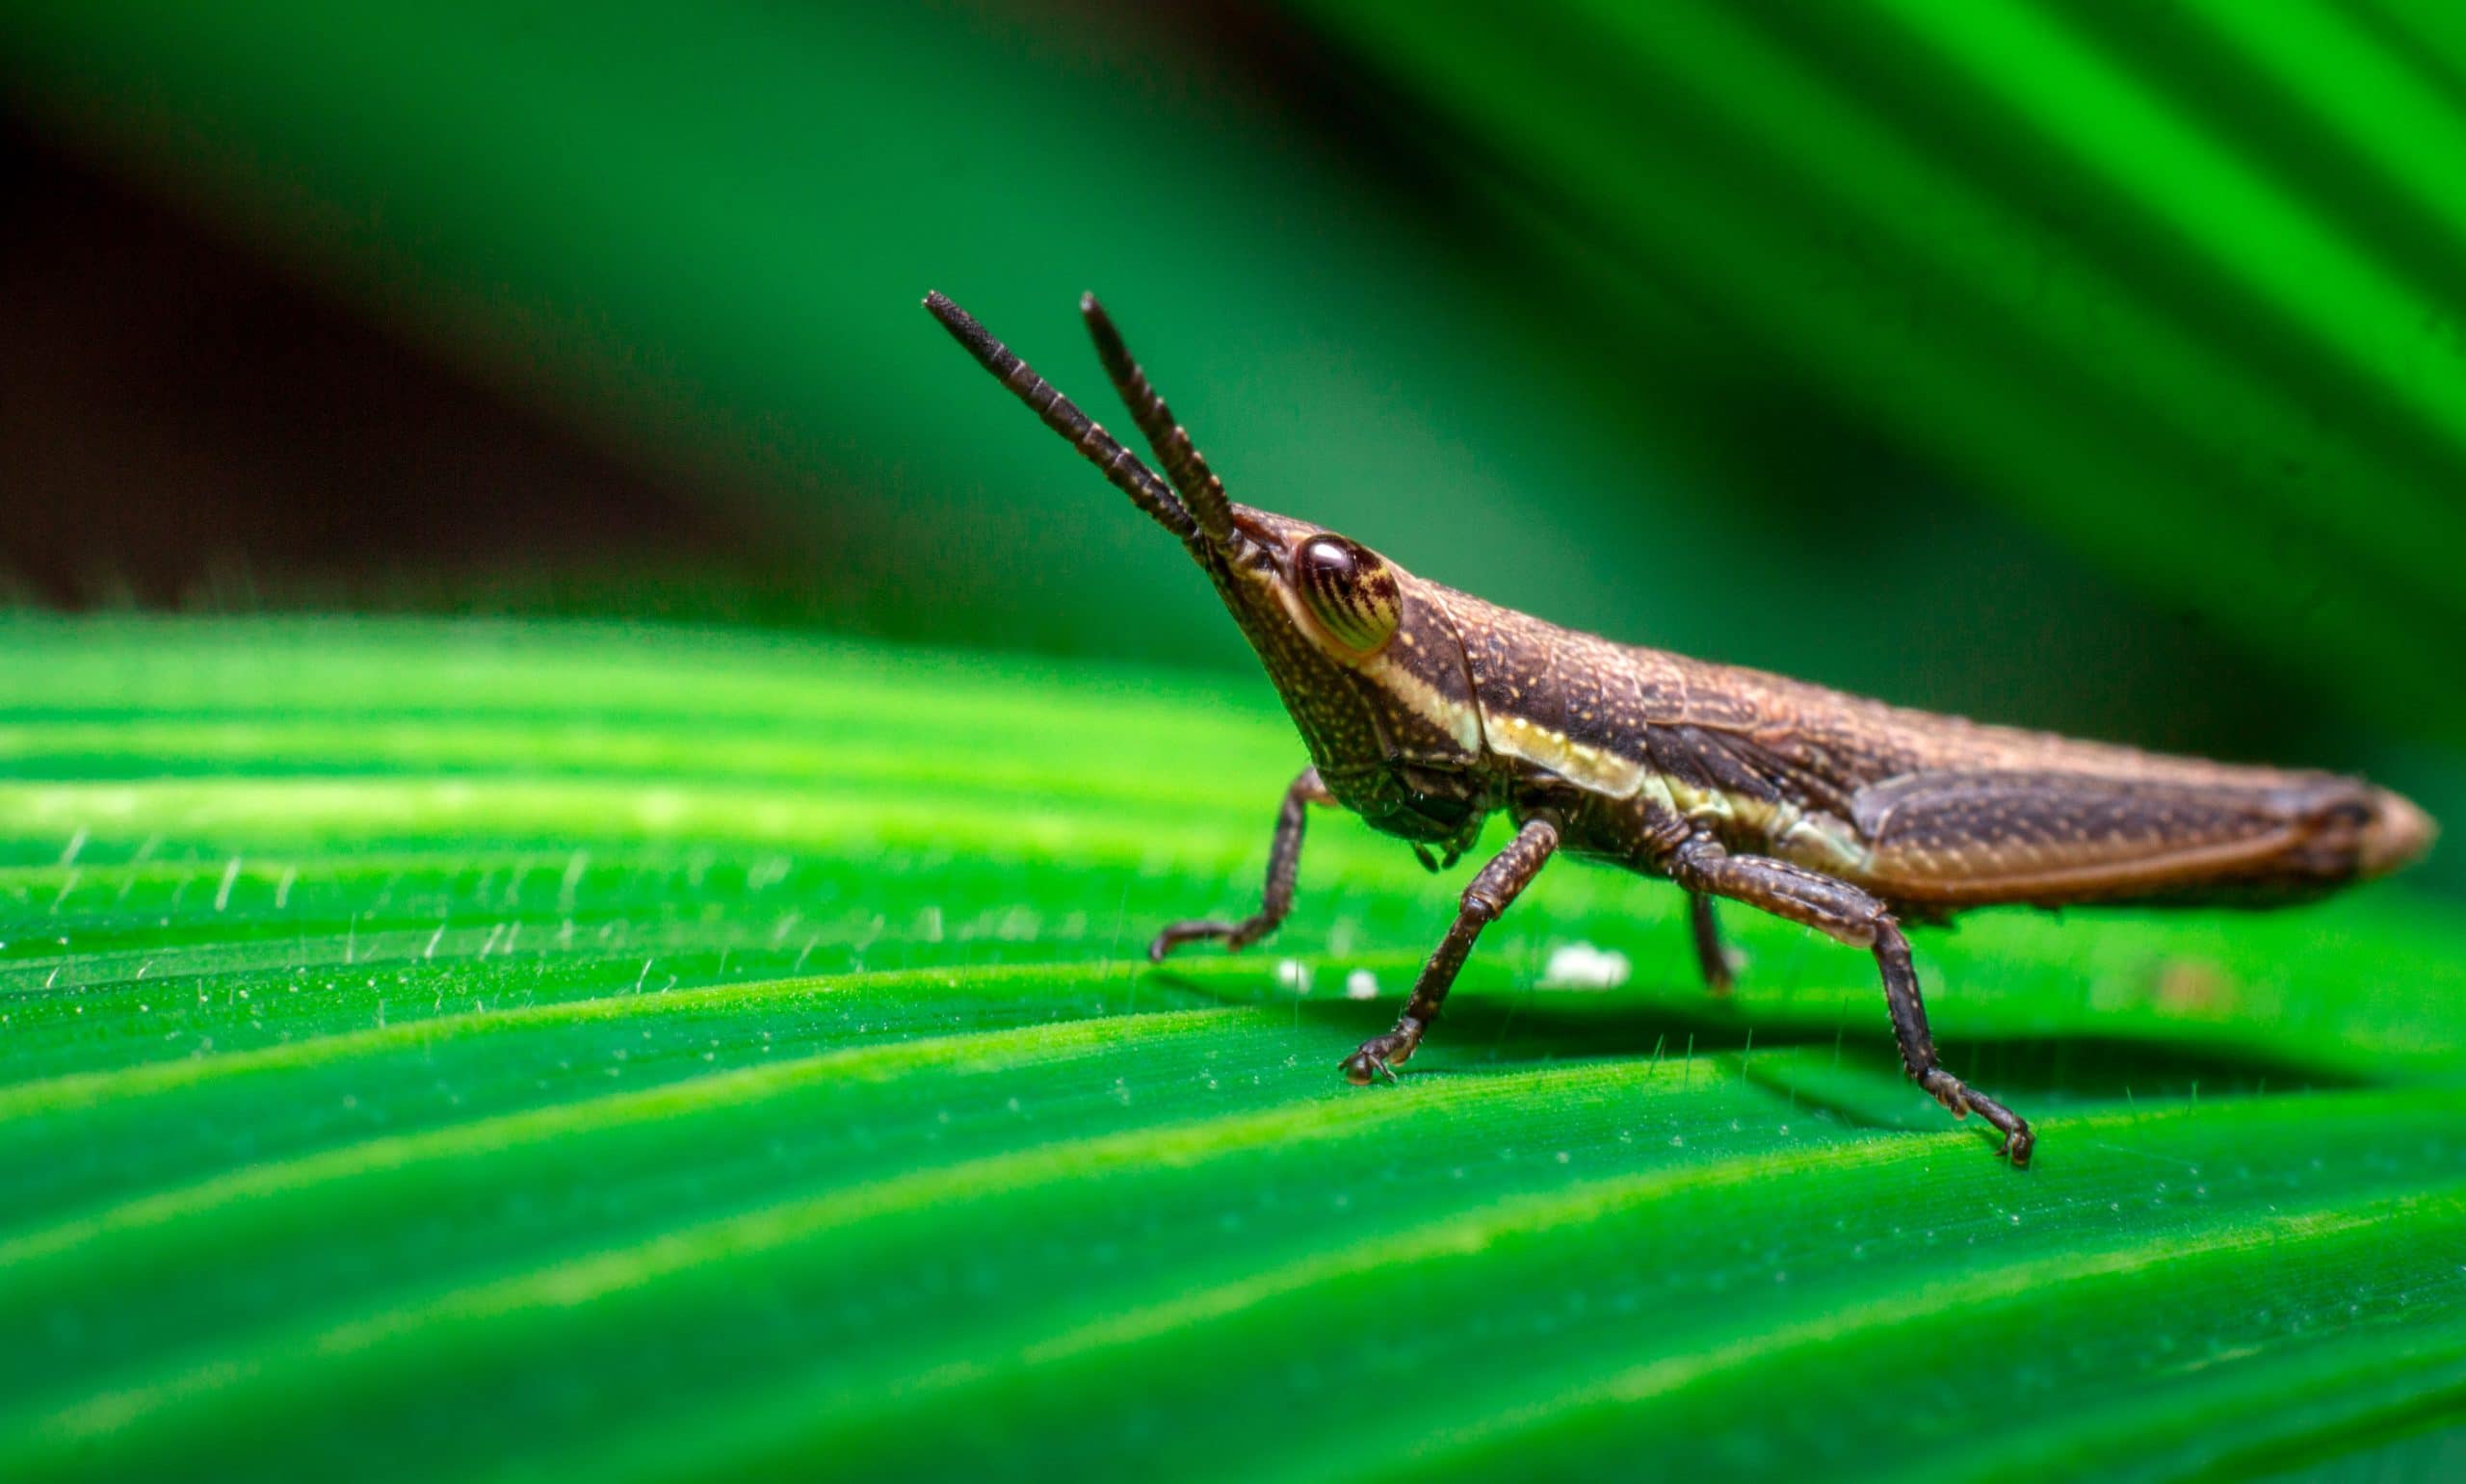 Tips for Photographing Insects on leaf